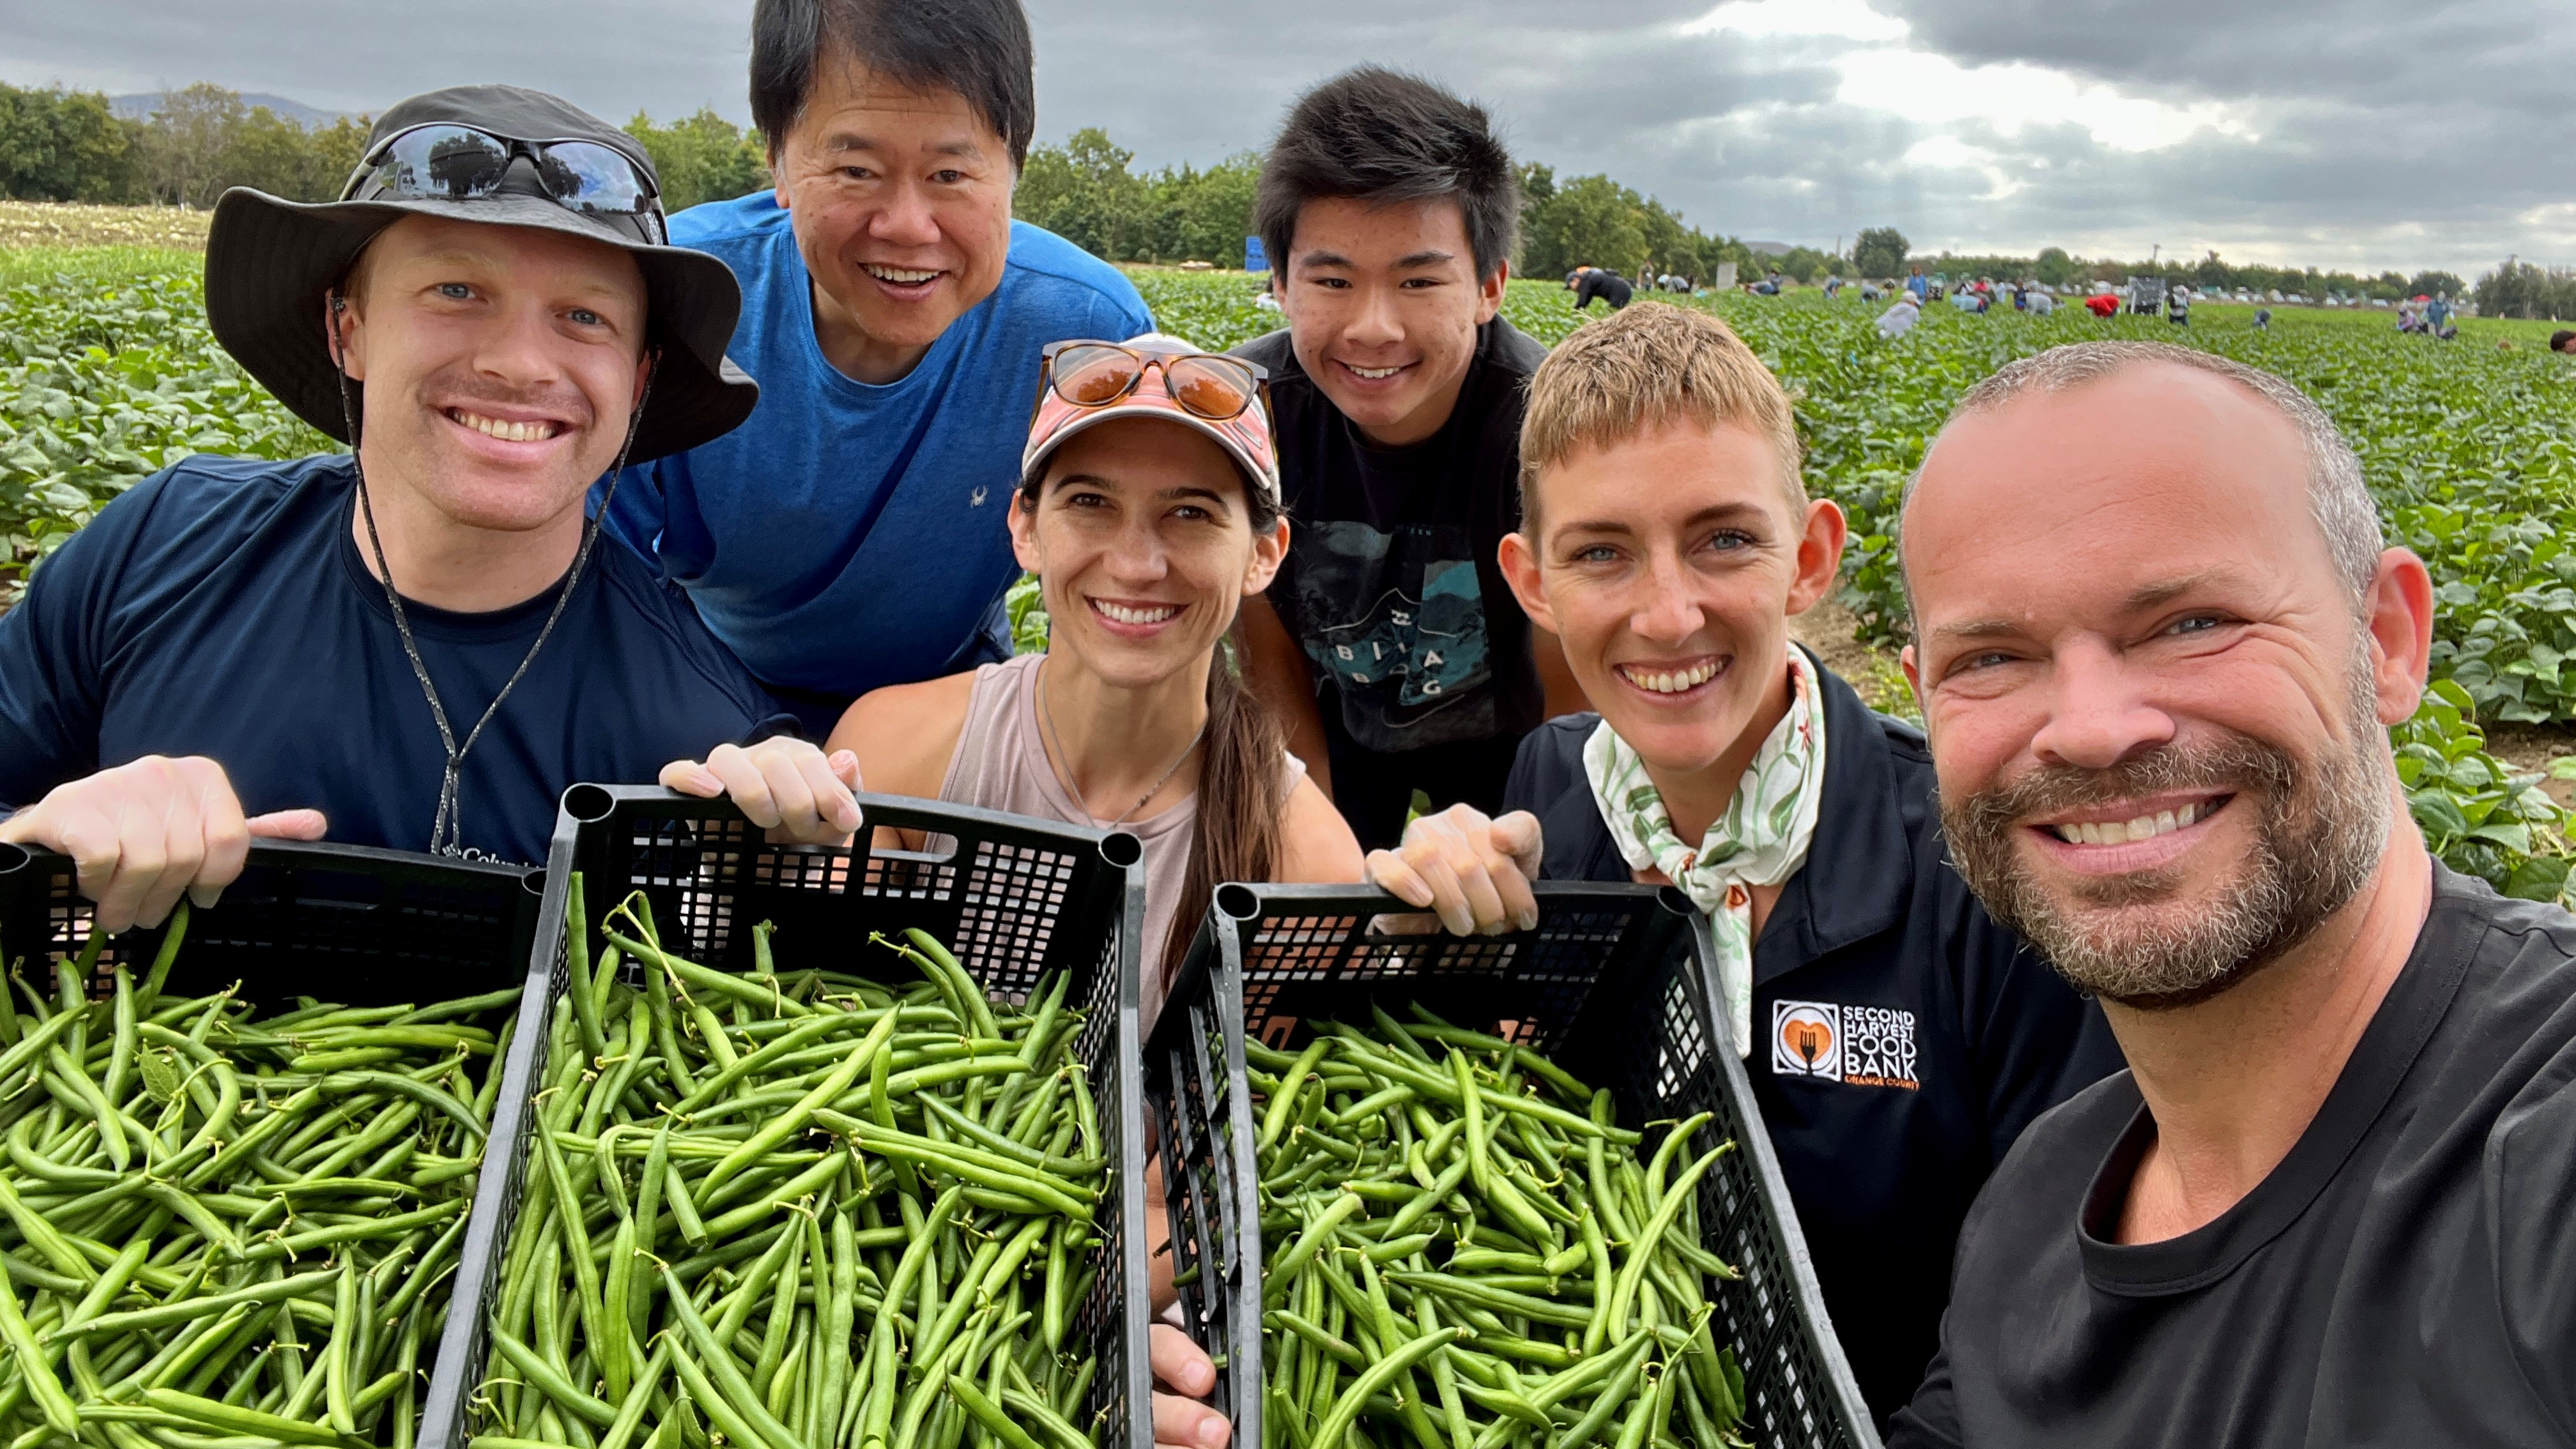 Volunteers for Second Harvest Food Bank and America’s Heartland host Rob Stewart at a green bean field in Orange County, CA